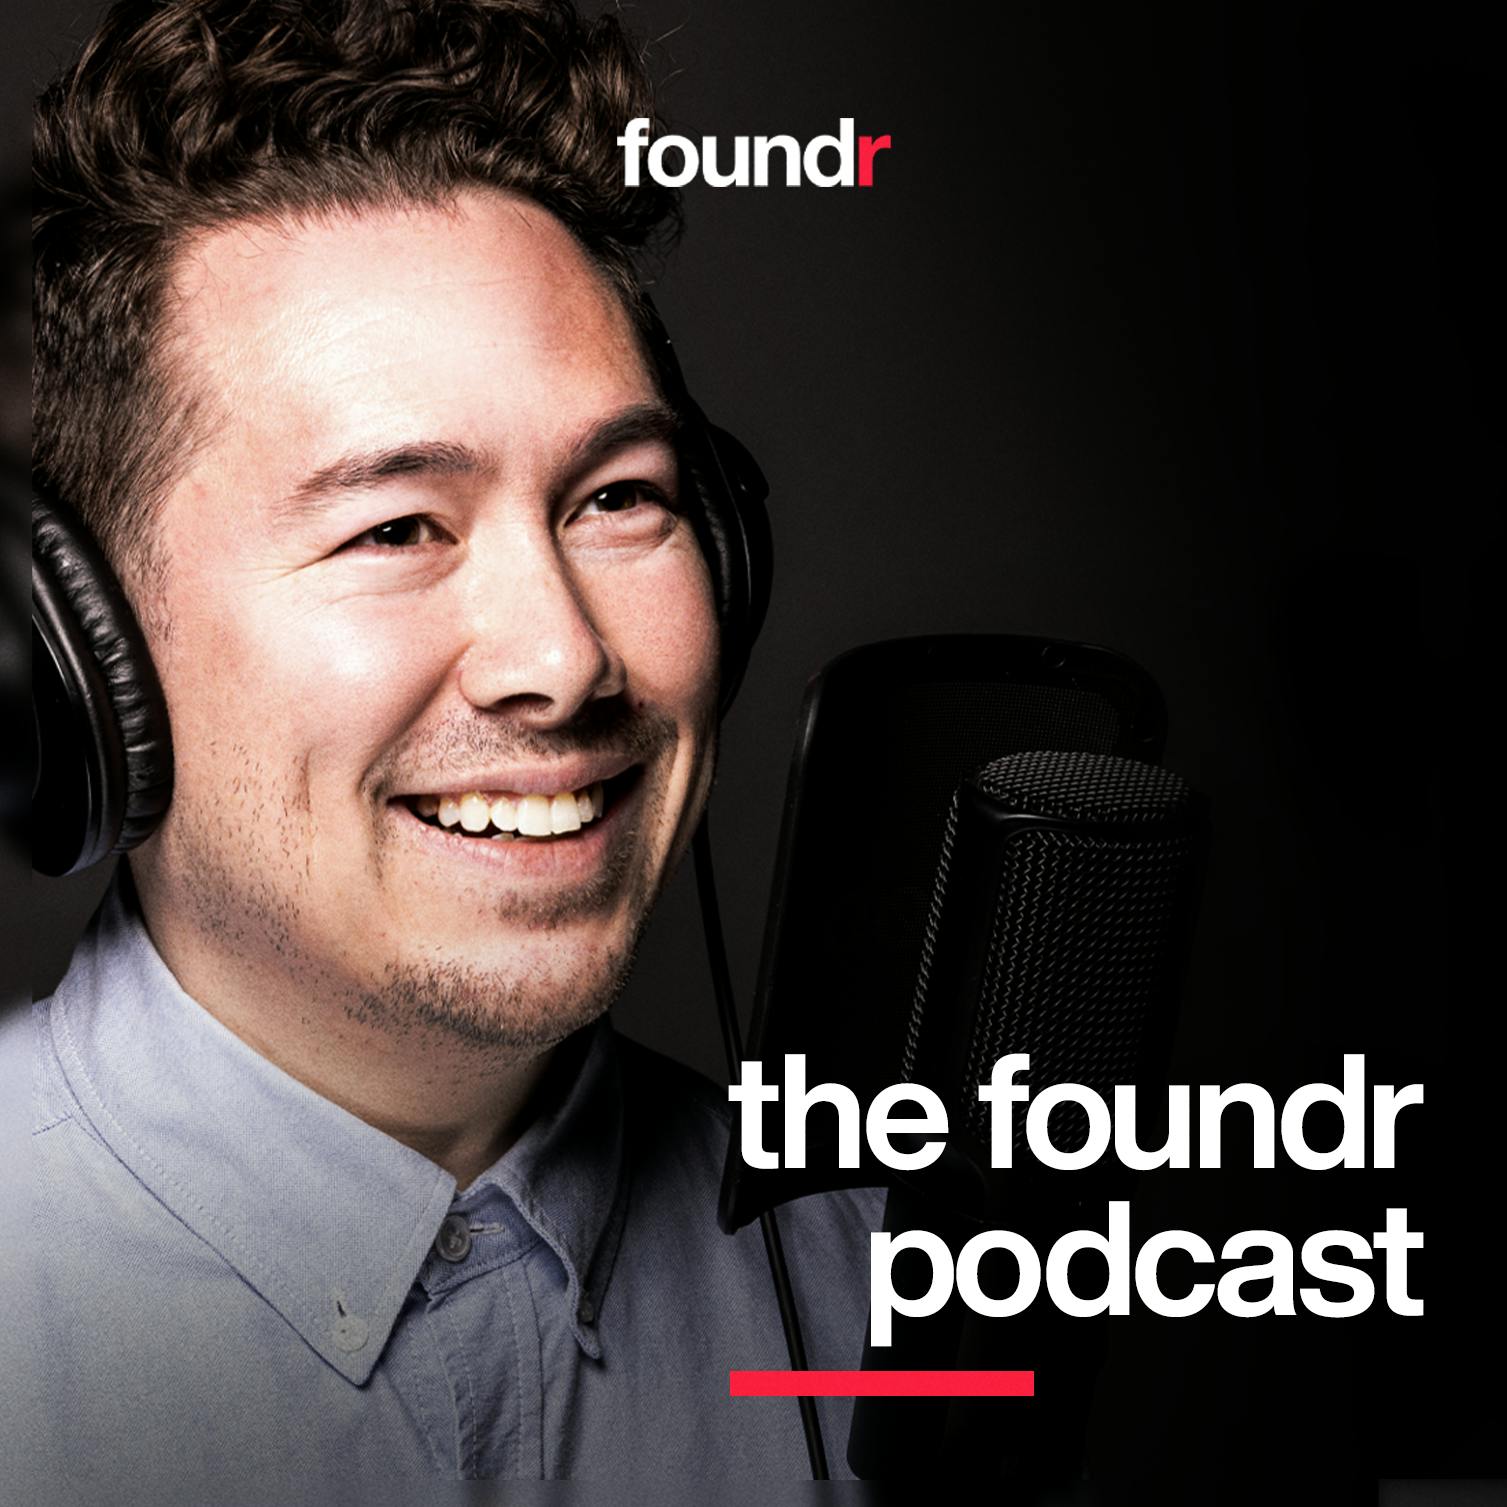 301: 8-Figure Ecommerce Founder Reveals His Best Insights For Ecommerce Entrepreneurs Struggling Through Covid-19